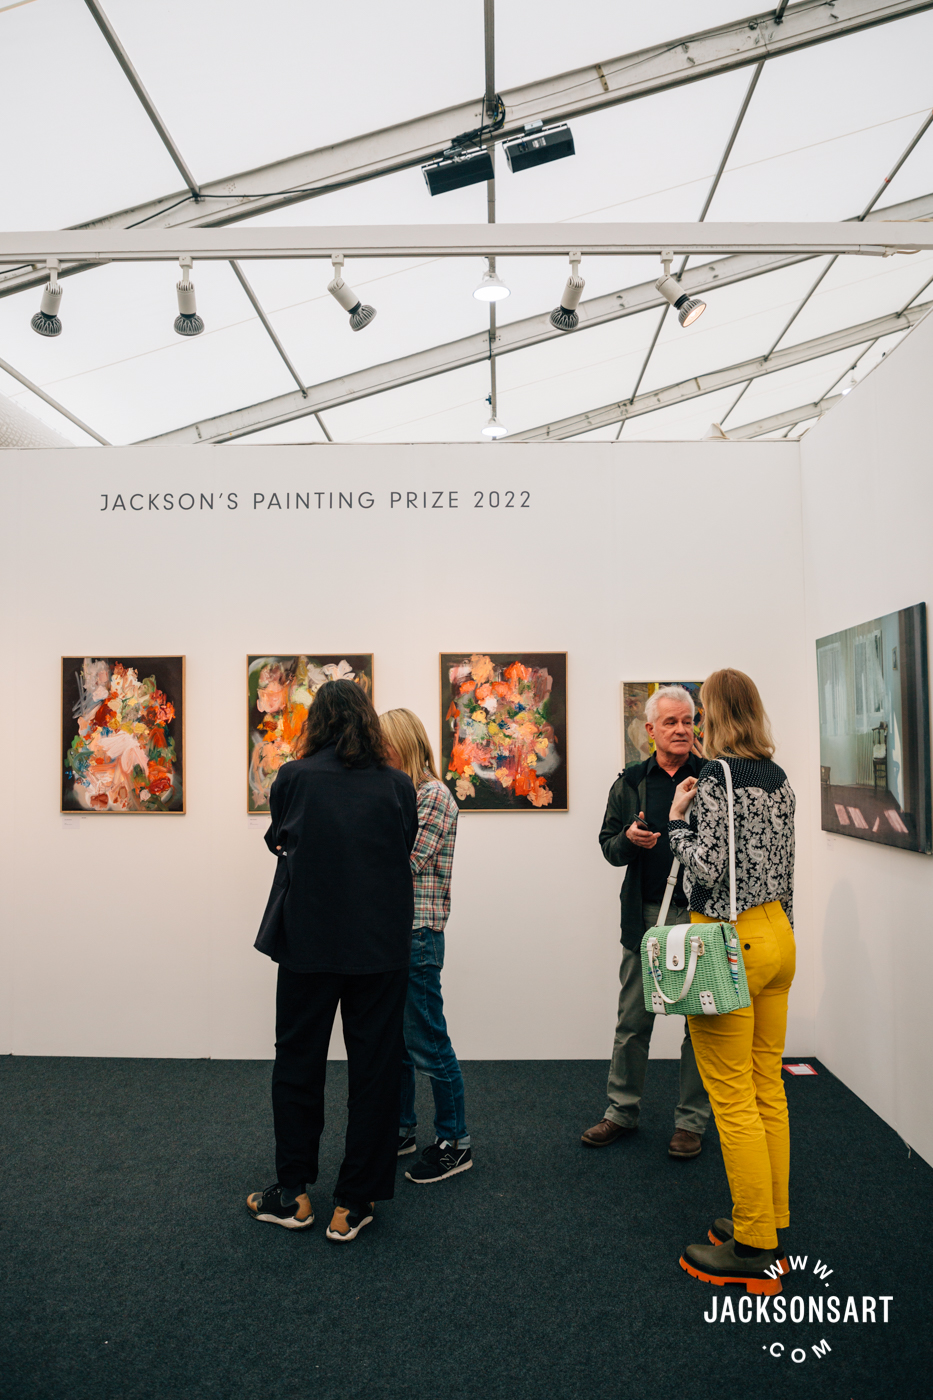 Jackson’s Painting Prize 2022 Exhibition At The Affordable Art Fair Hampstead